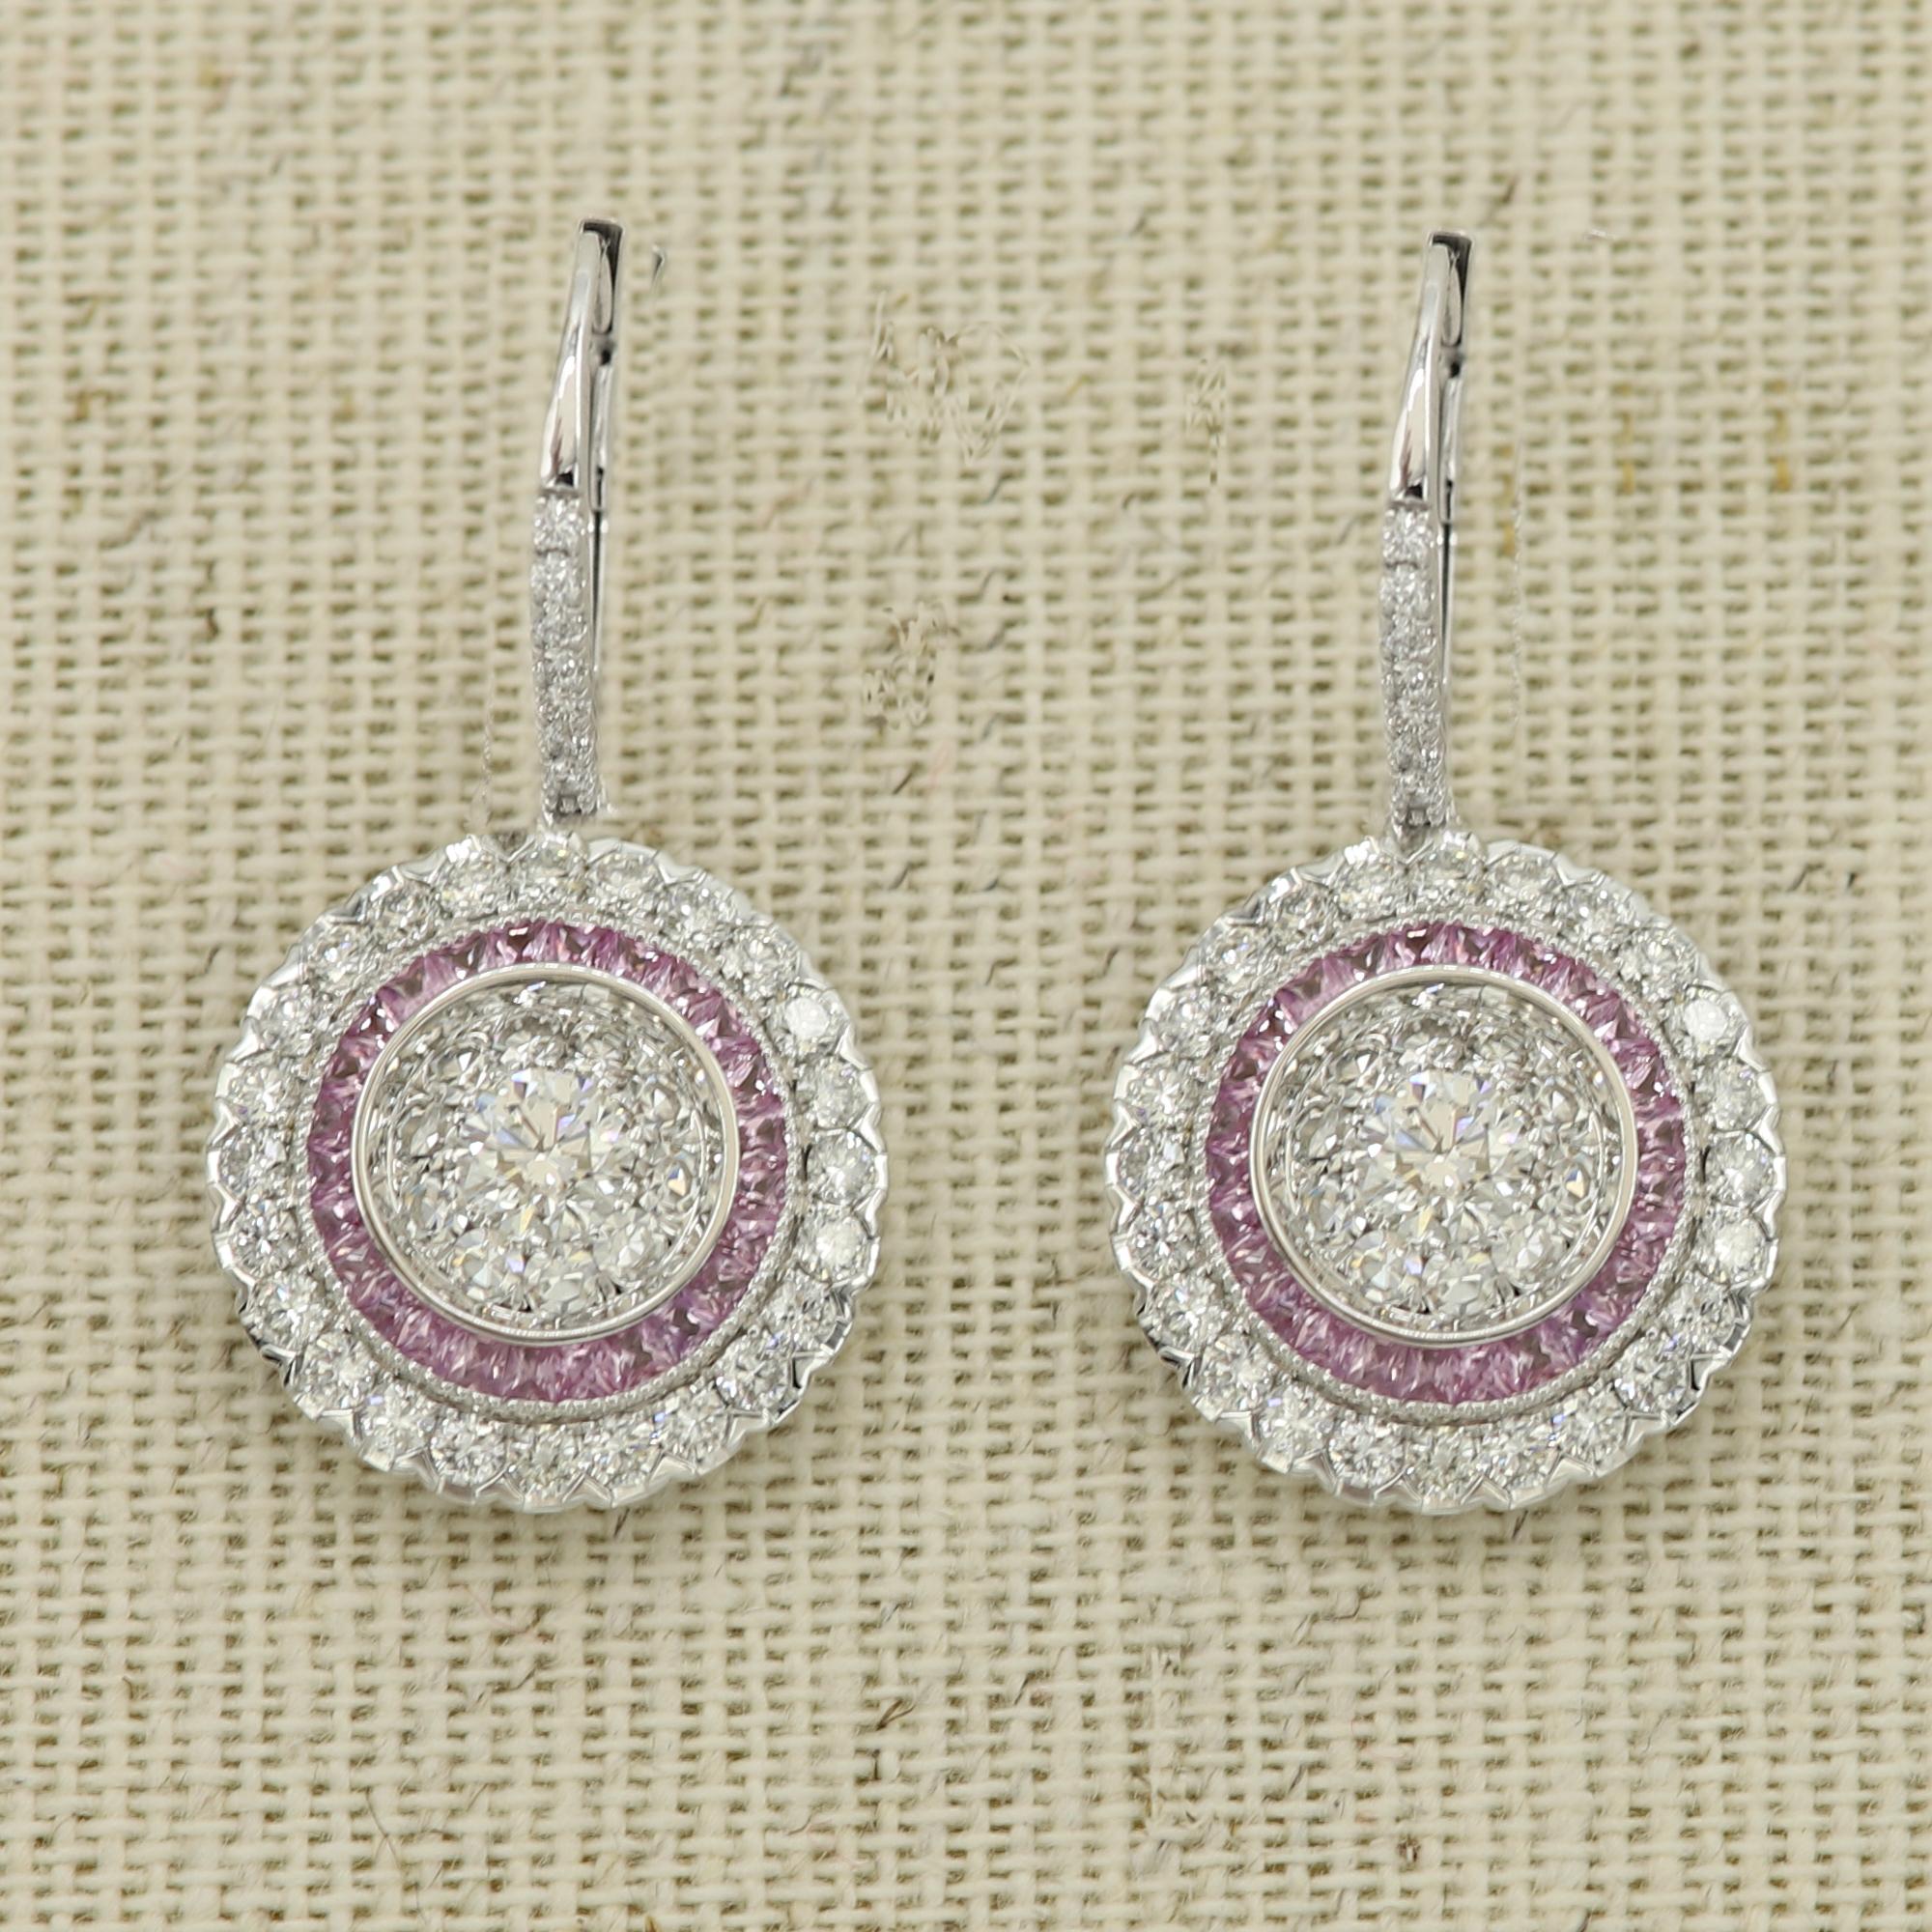 Round Cut Art Deco Style Earring 18 Karat White Gold Diamonds and Pink Sapphire Earrings For Sale